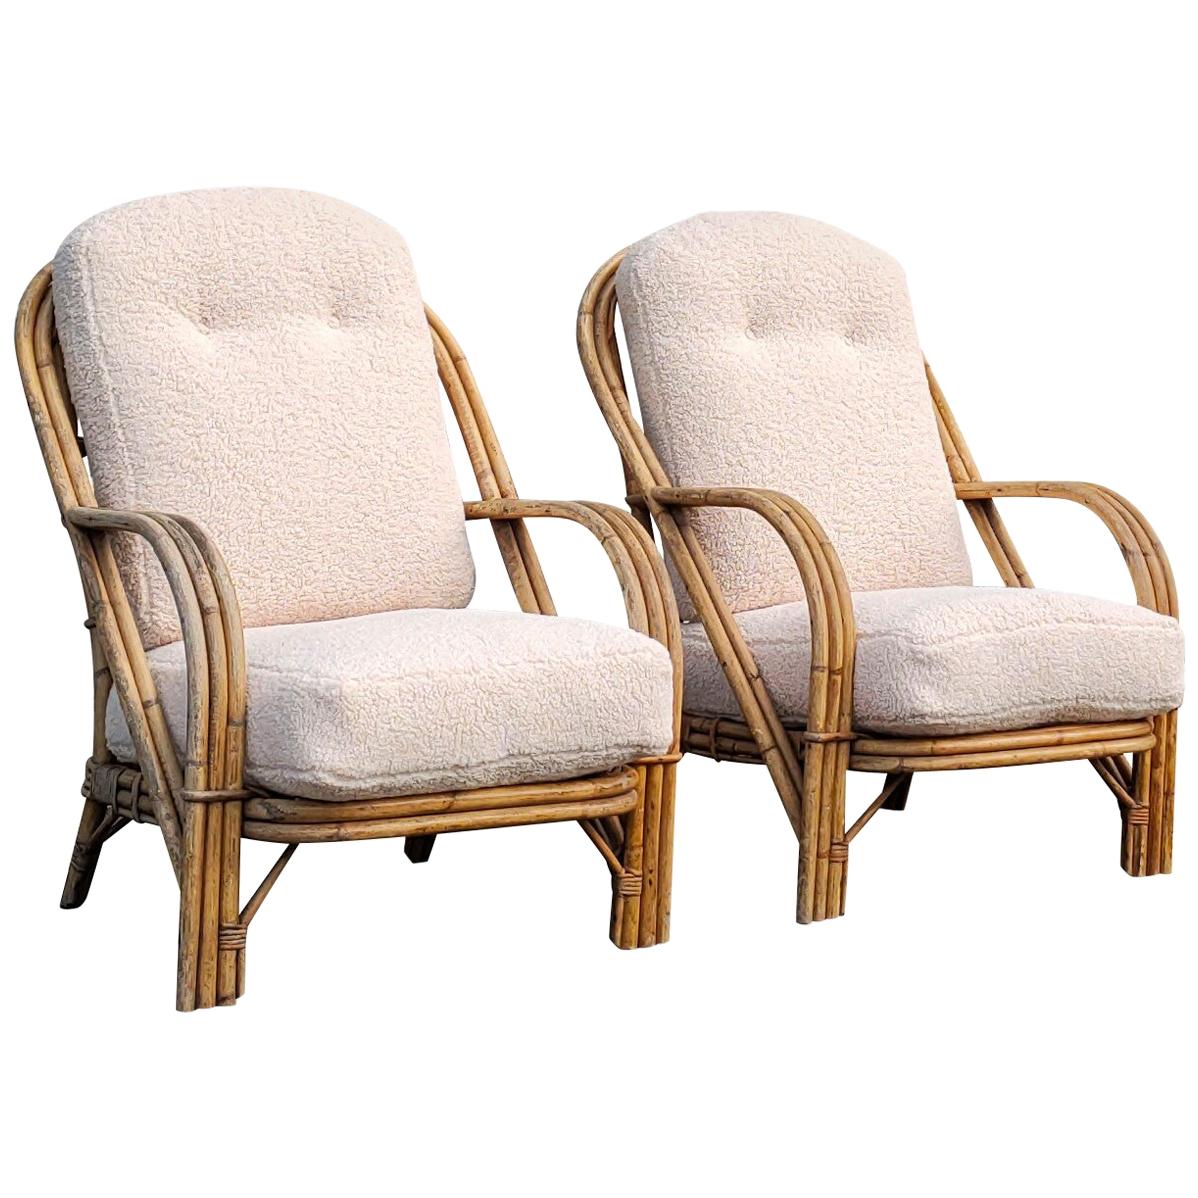 Pair of Wicker Armchairs by Audoux Minnet, France, 1960s